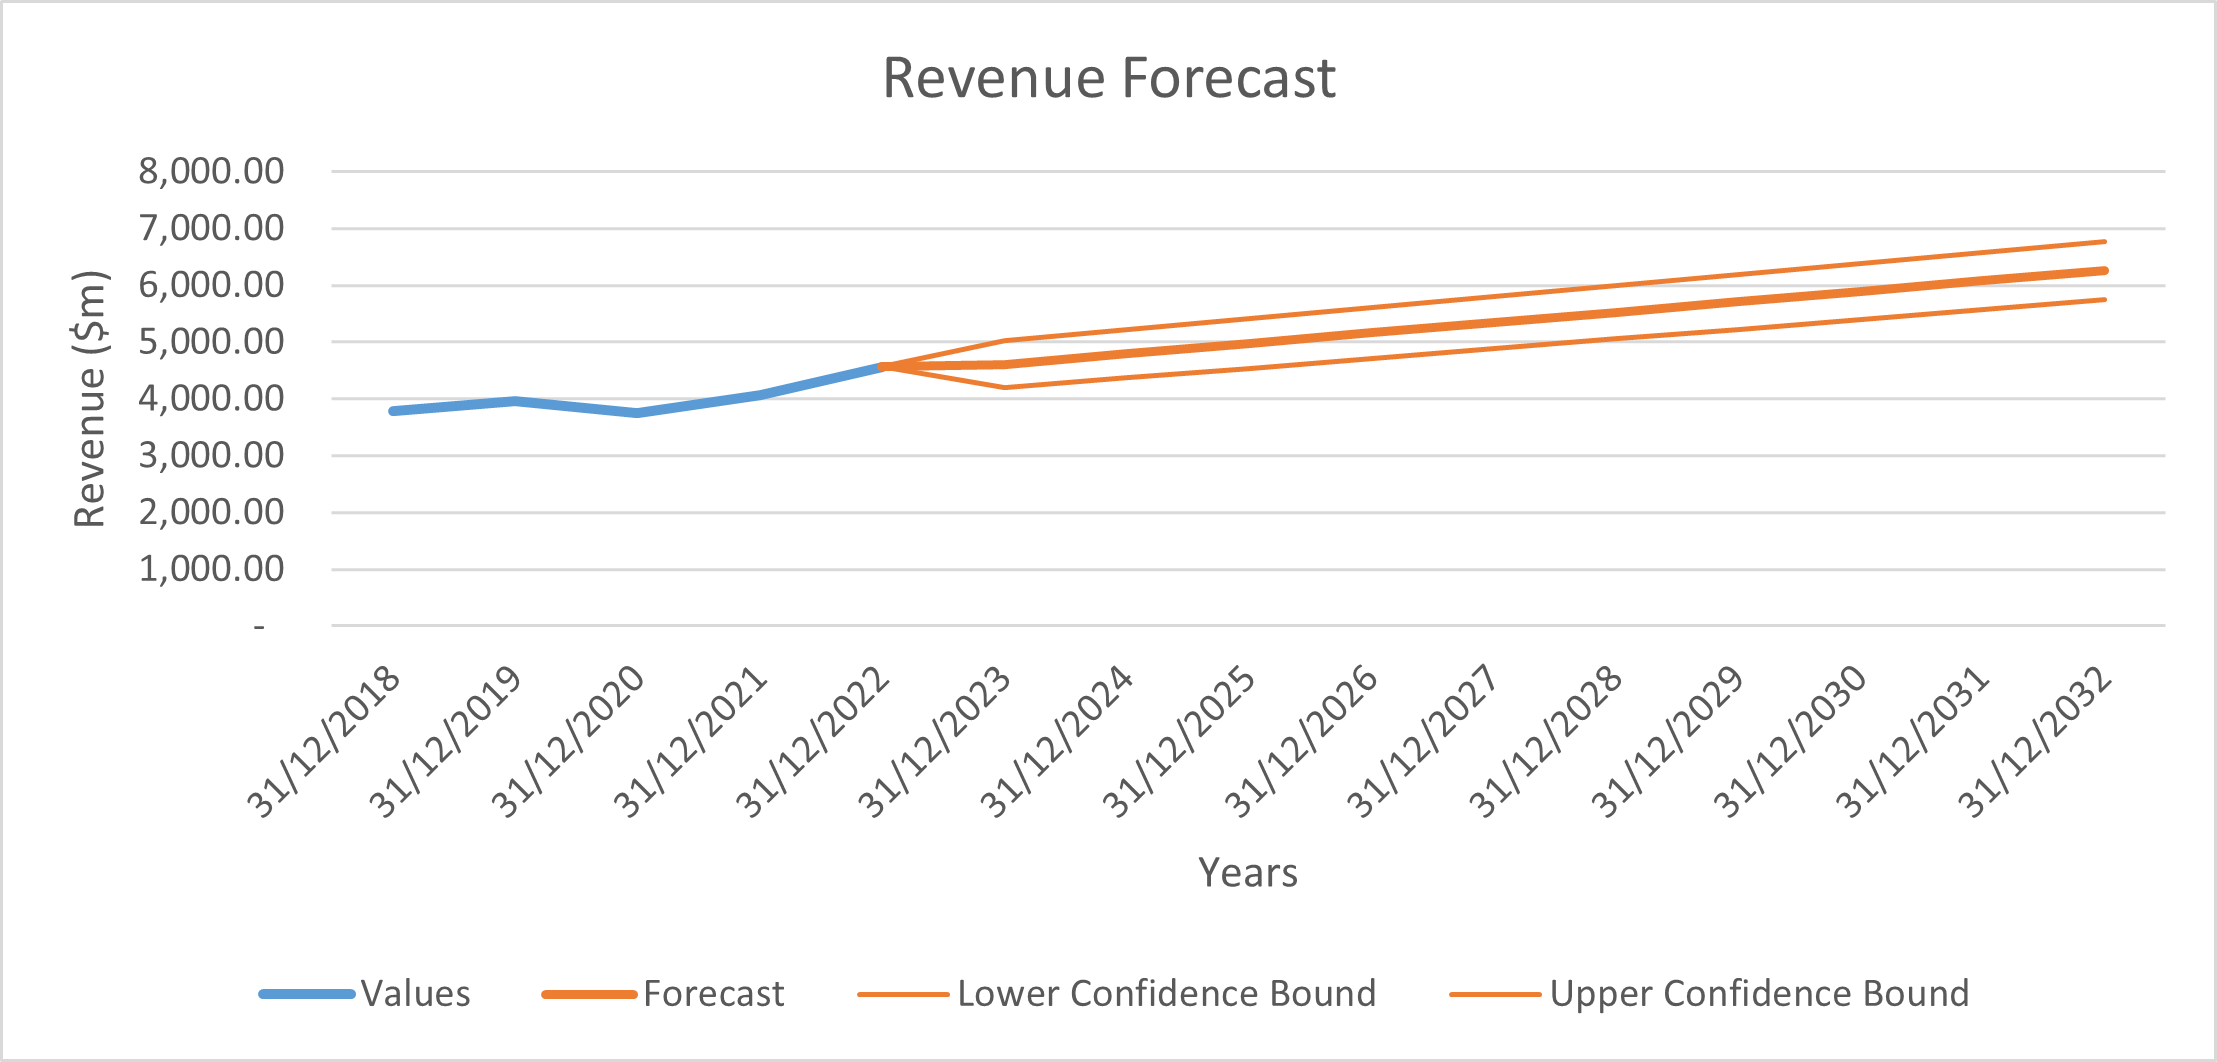 Revenue Forecasts based on historical revenues.